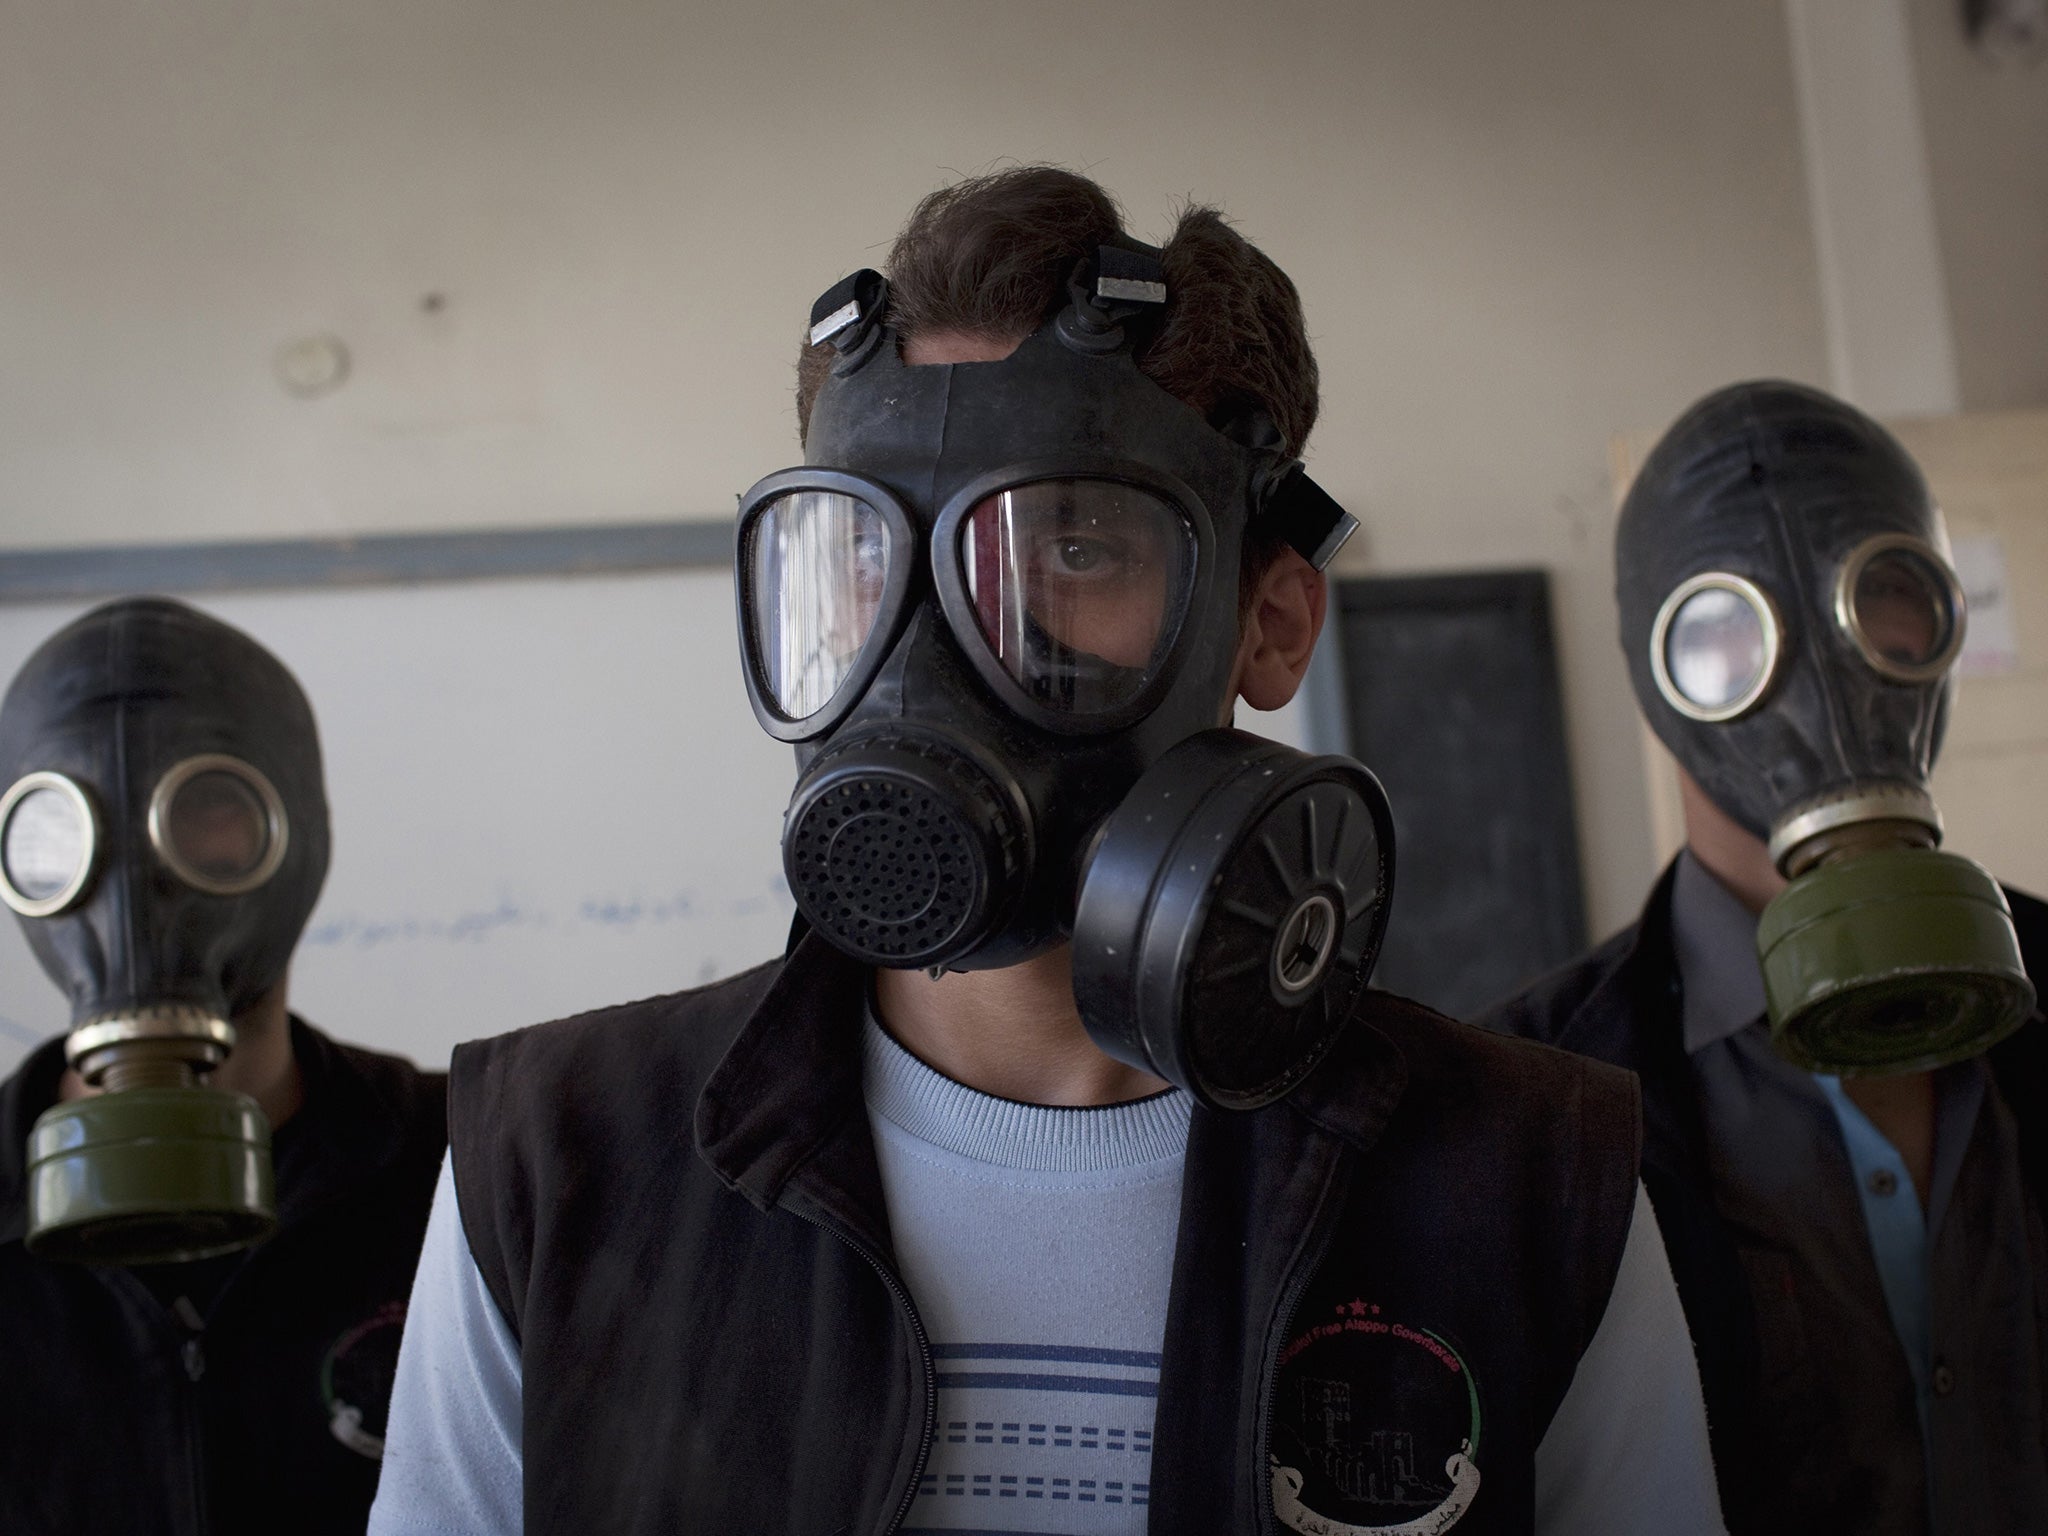 Volunteers wear gas masks in Aleppo during a class on how to respond to chemical attacks